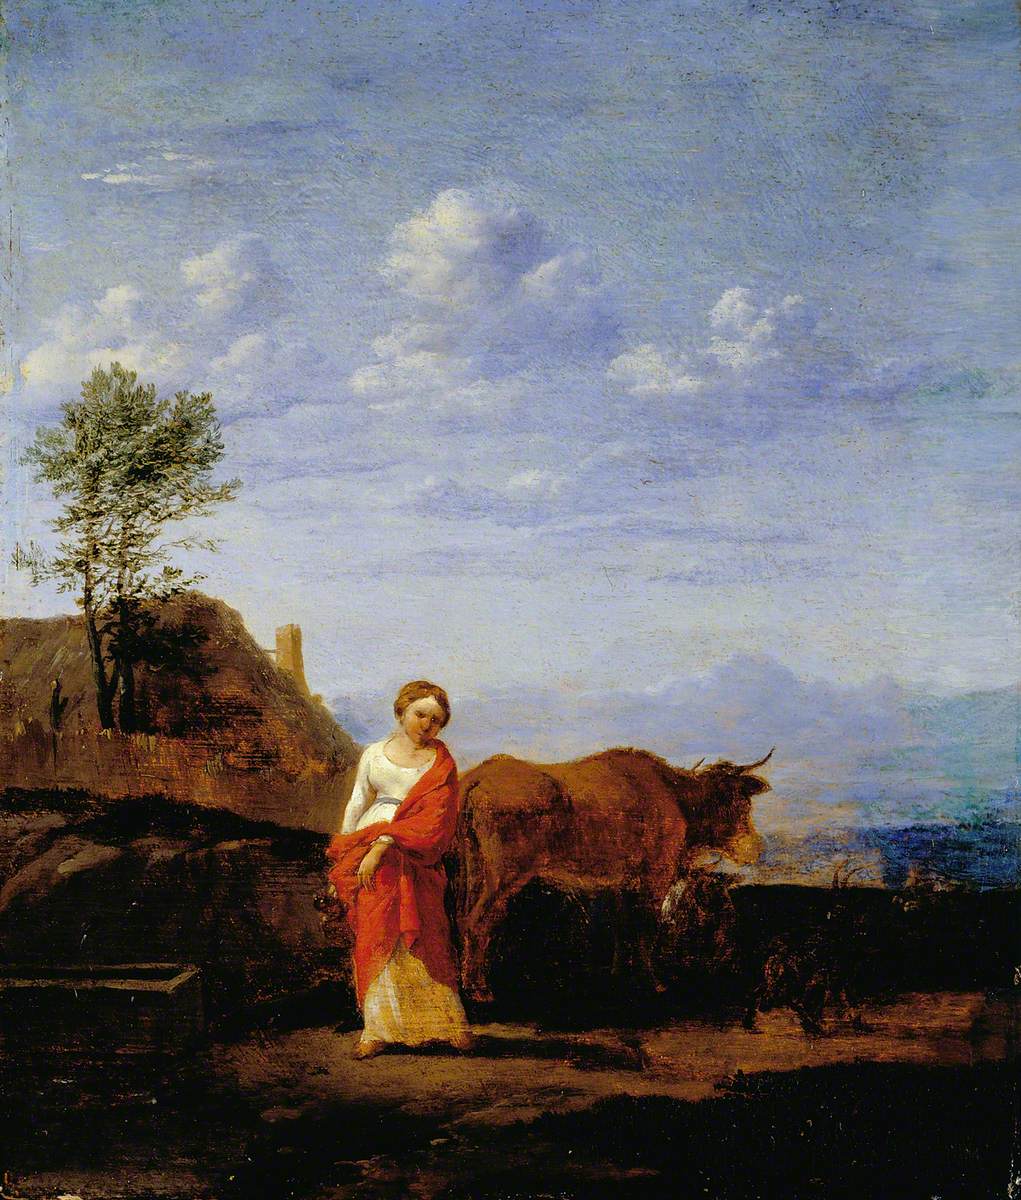 A Woman with Cows on a Road